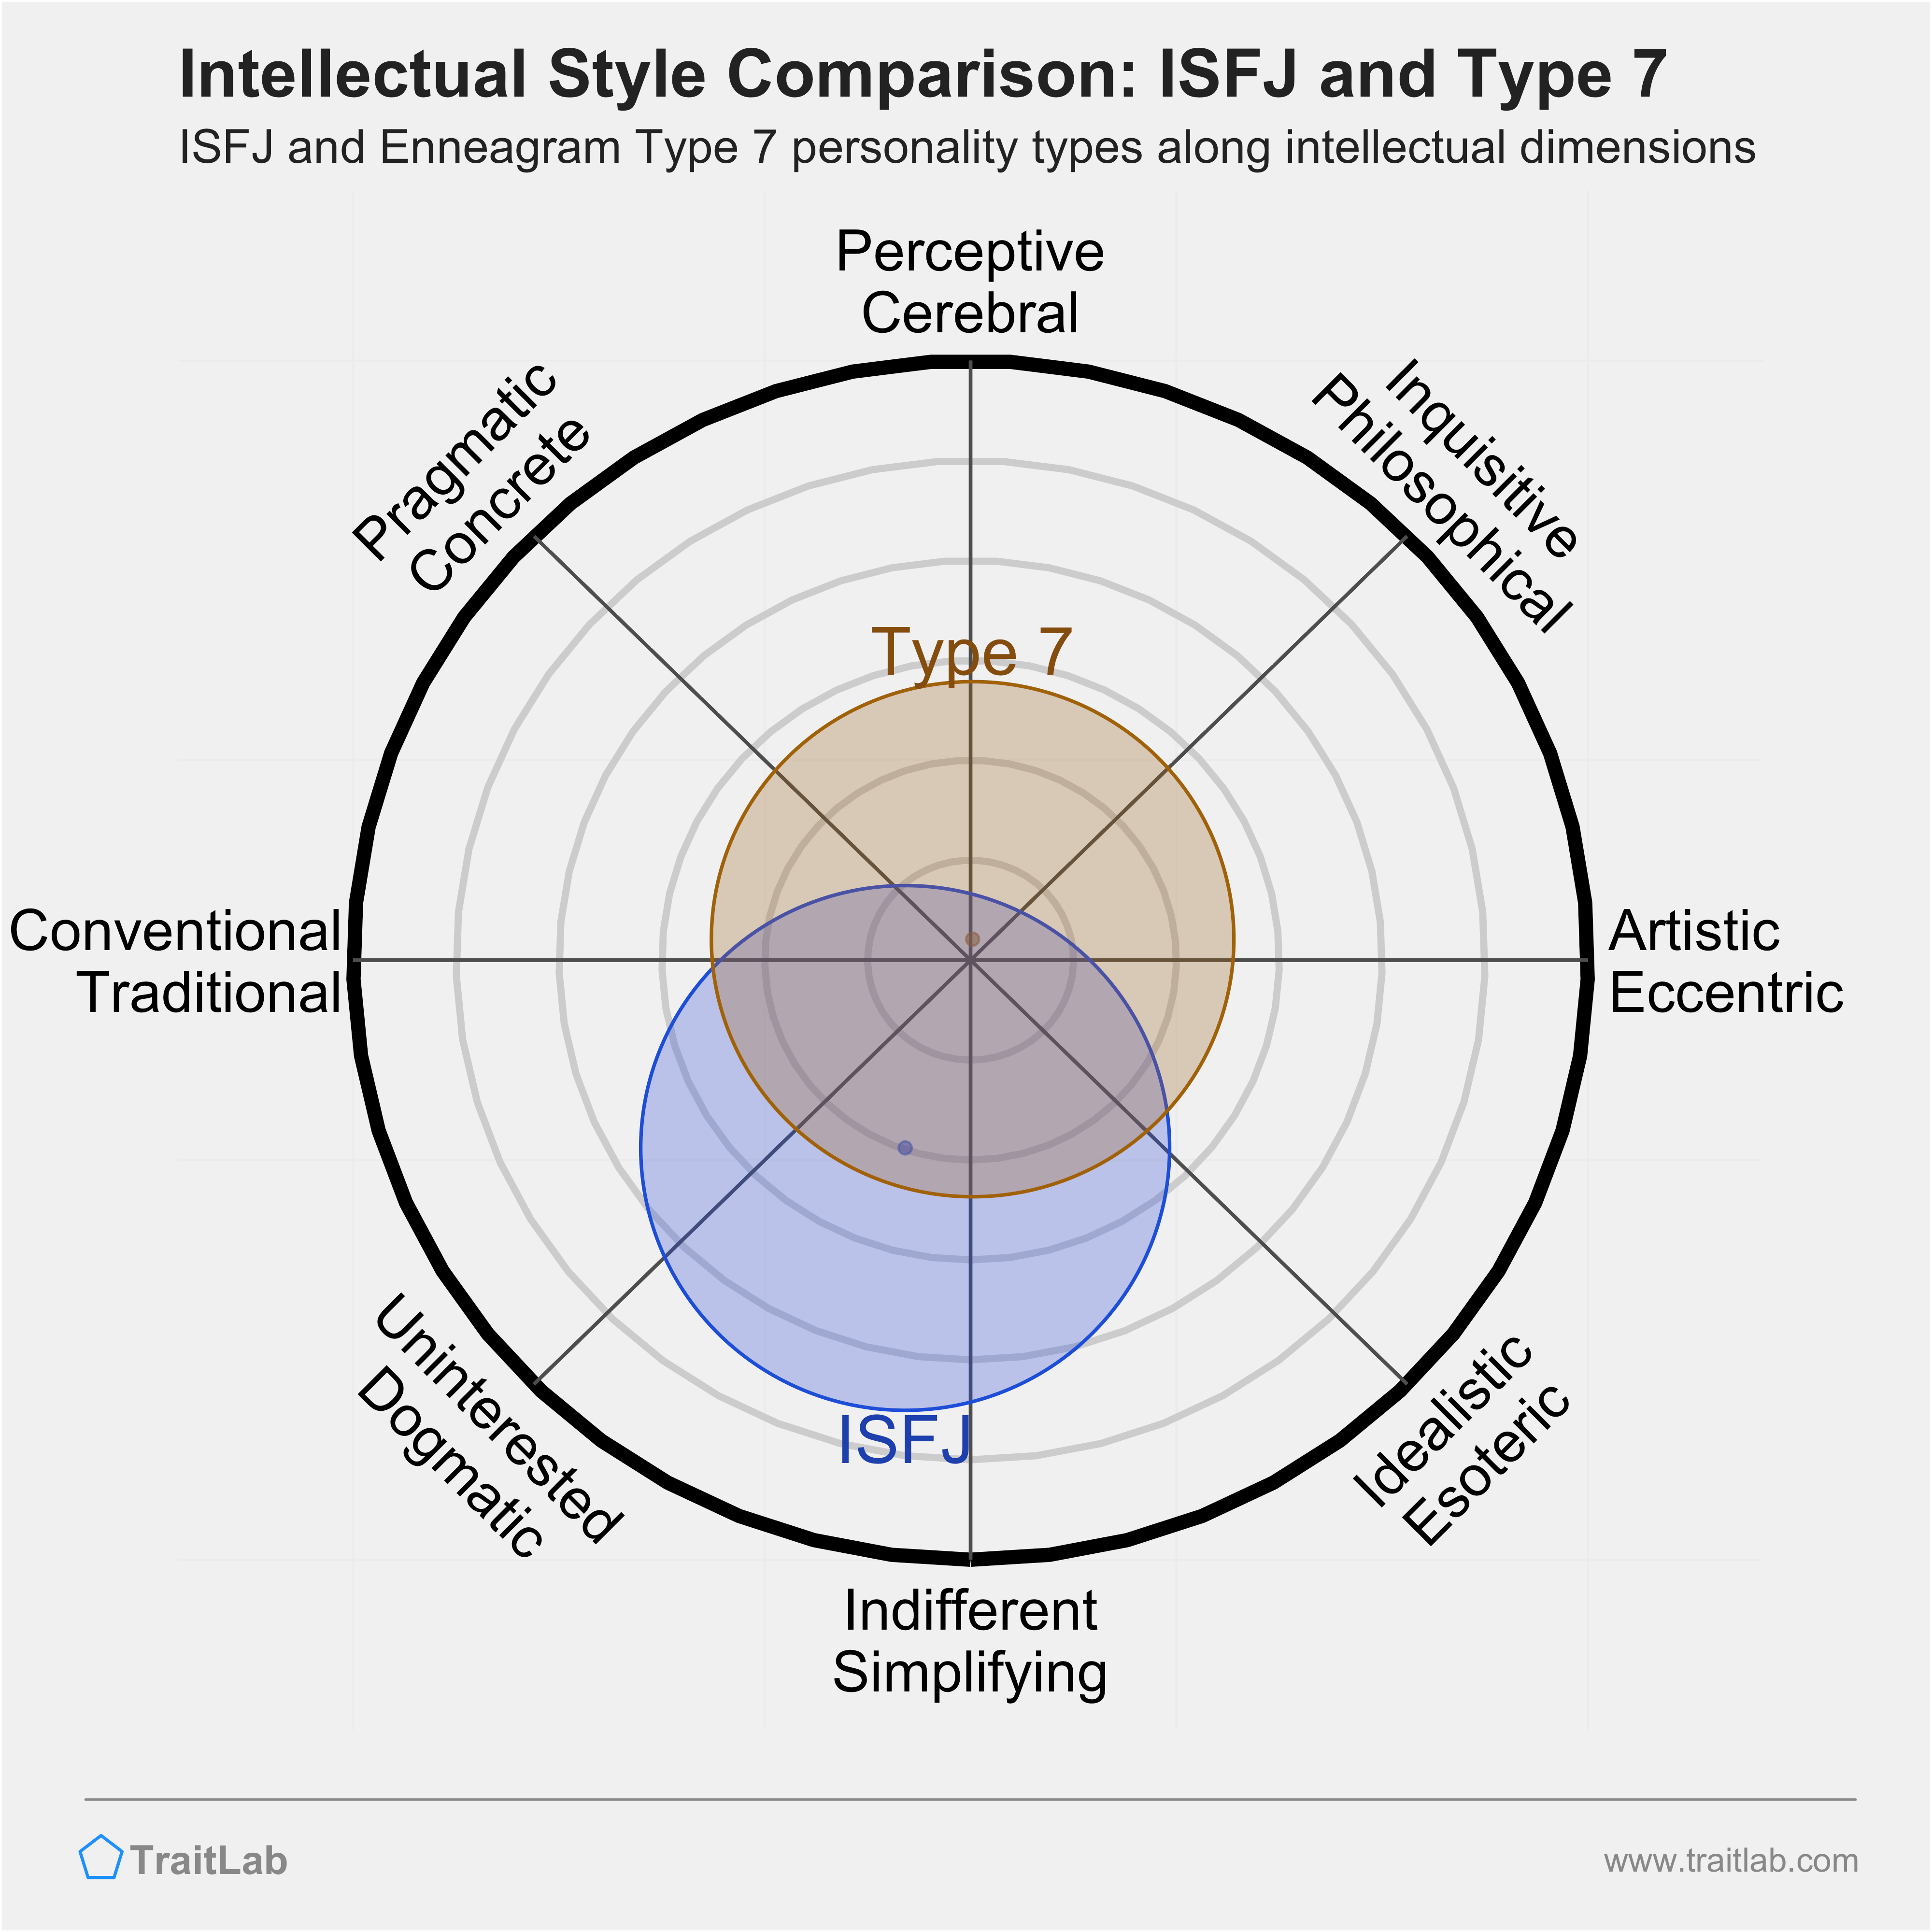 ISFJ and Type 7 comparison across intellectual dimensions